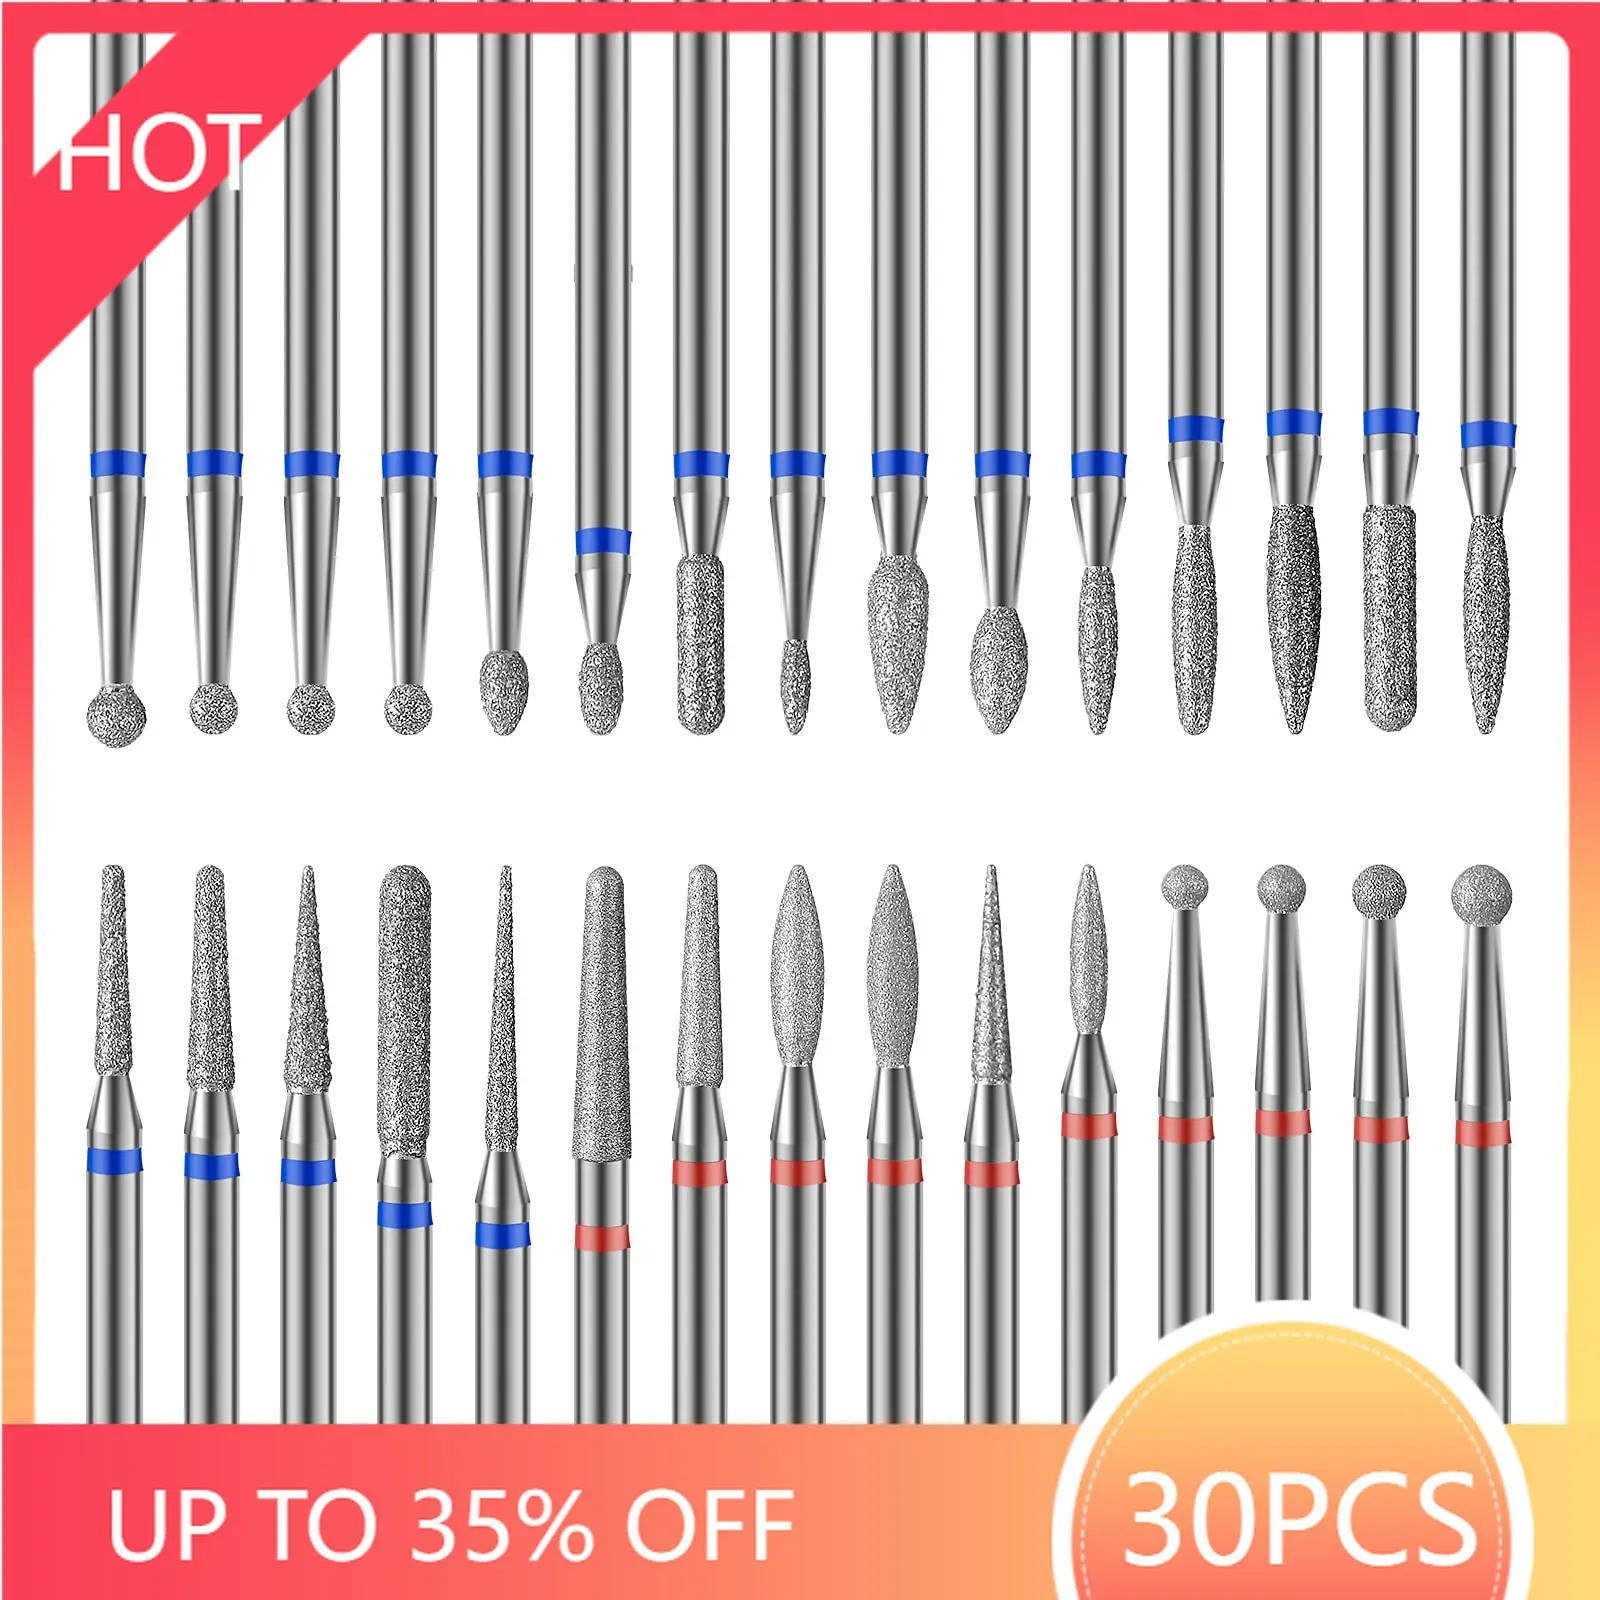 

30pcs Nail Drill Bits Set 3/32" Diamond Polishing Grinding Milling Cutters for Manicure Pedicure Electric Nail File Accessories